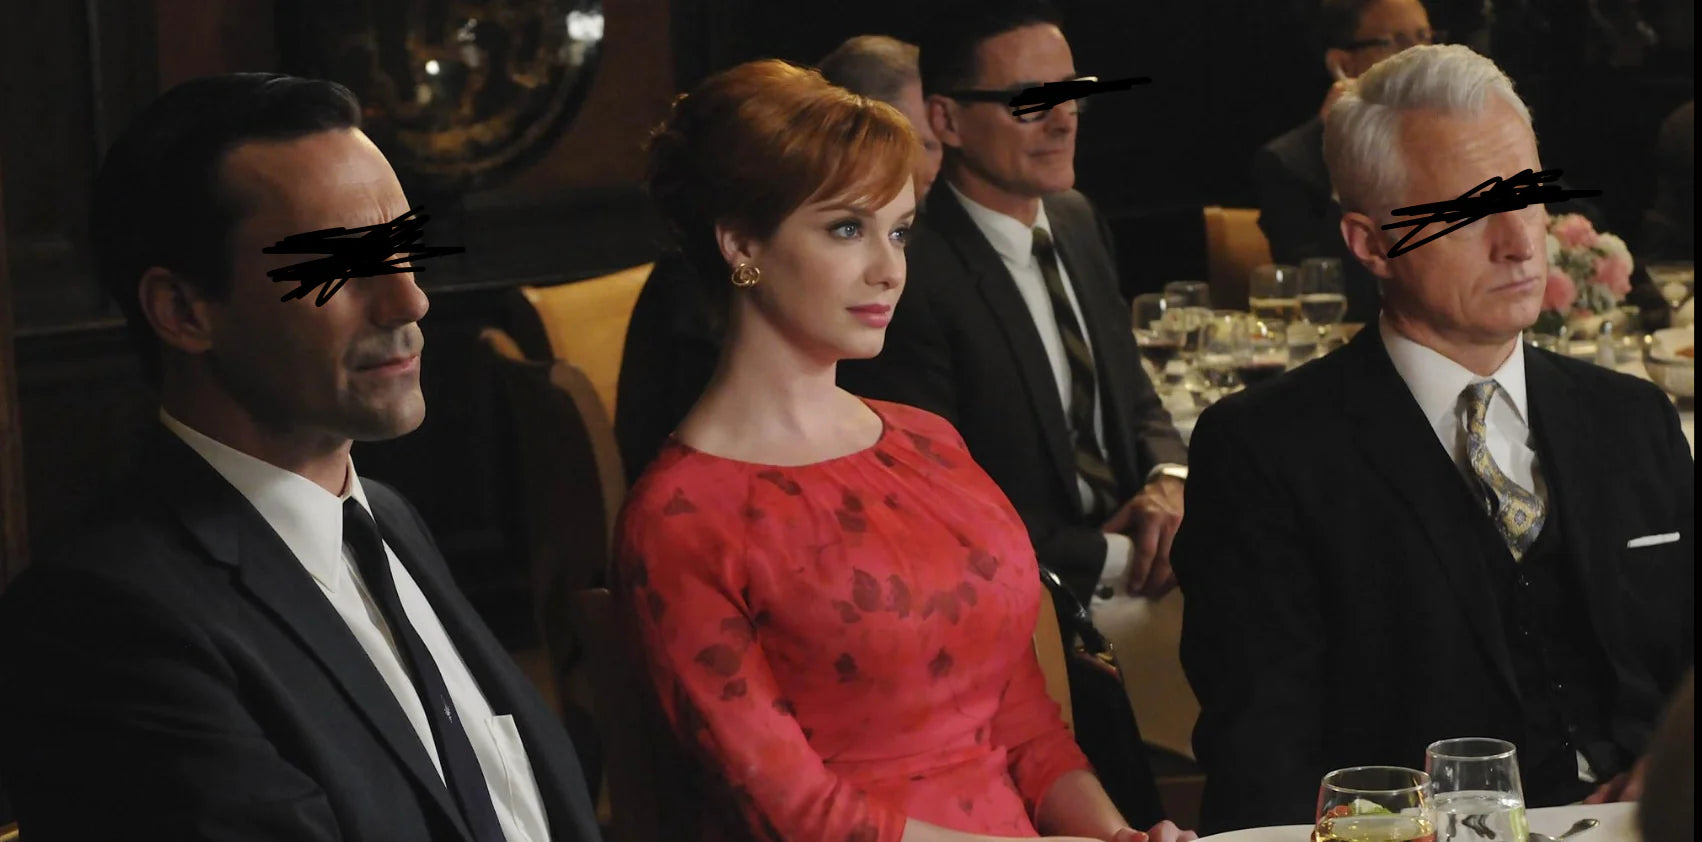 joan from mad men at an awards show flanked by two guys with their eyes gouged out 